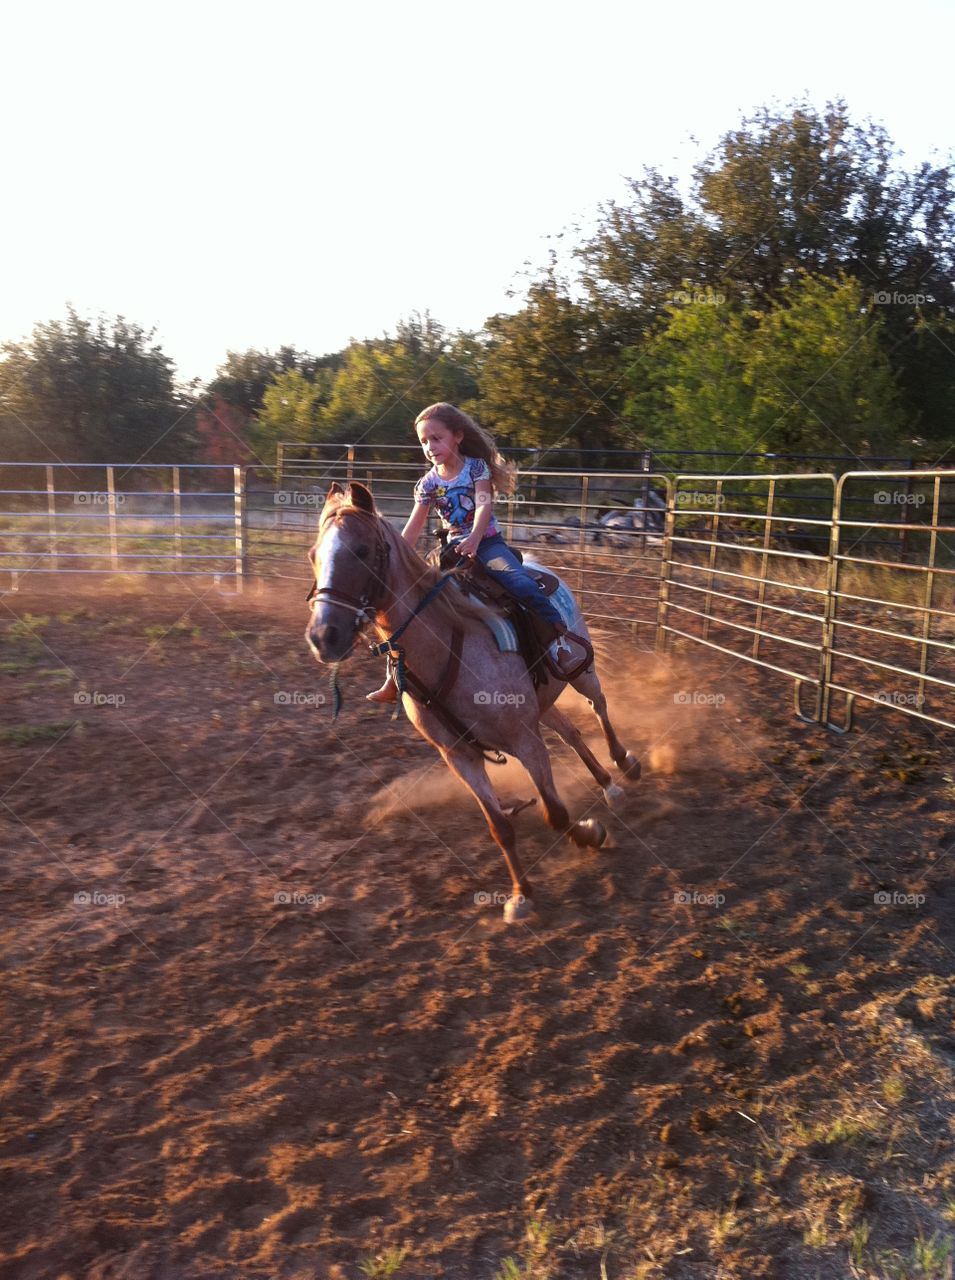 Girl riding a horse in an arena at dusk 